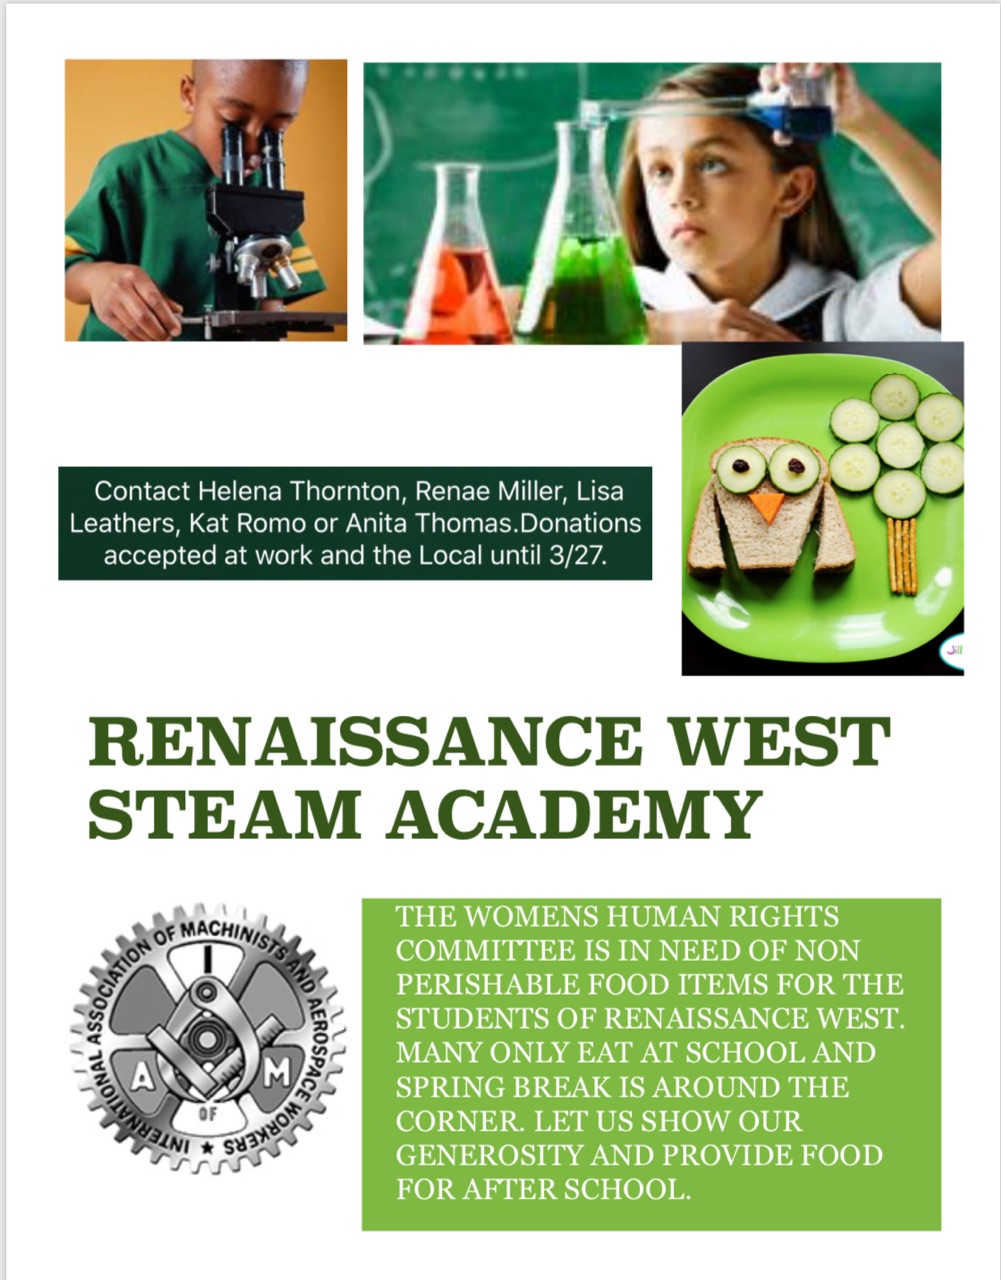 Donations for Renaissance West Steam Academy